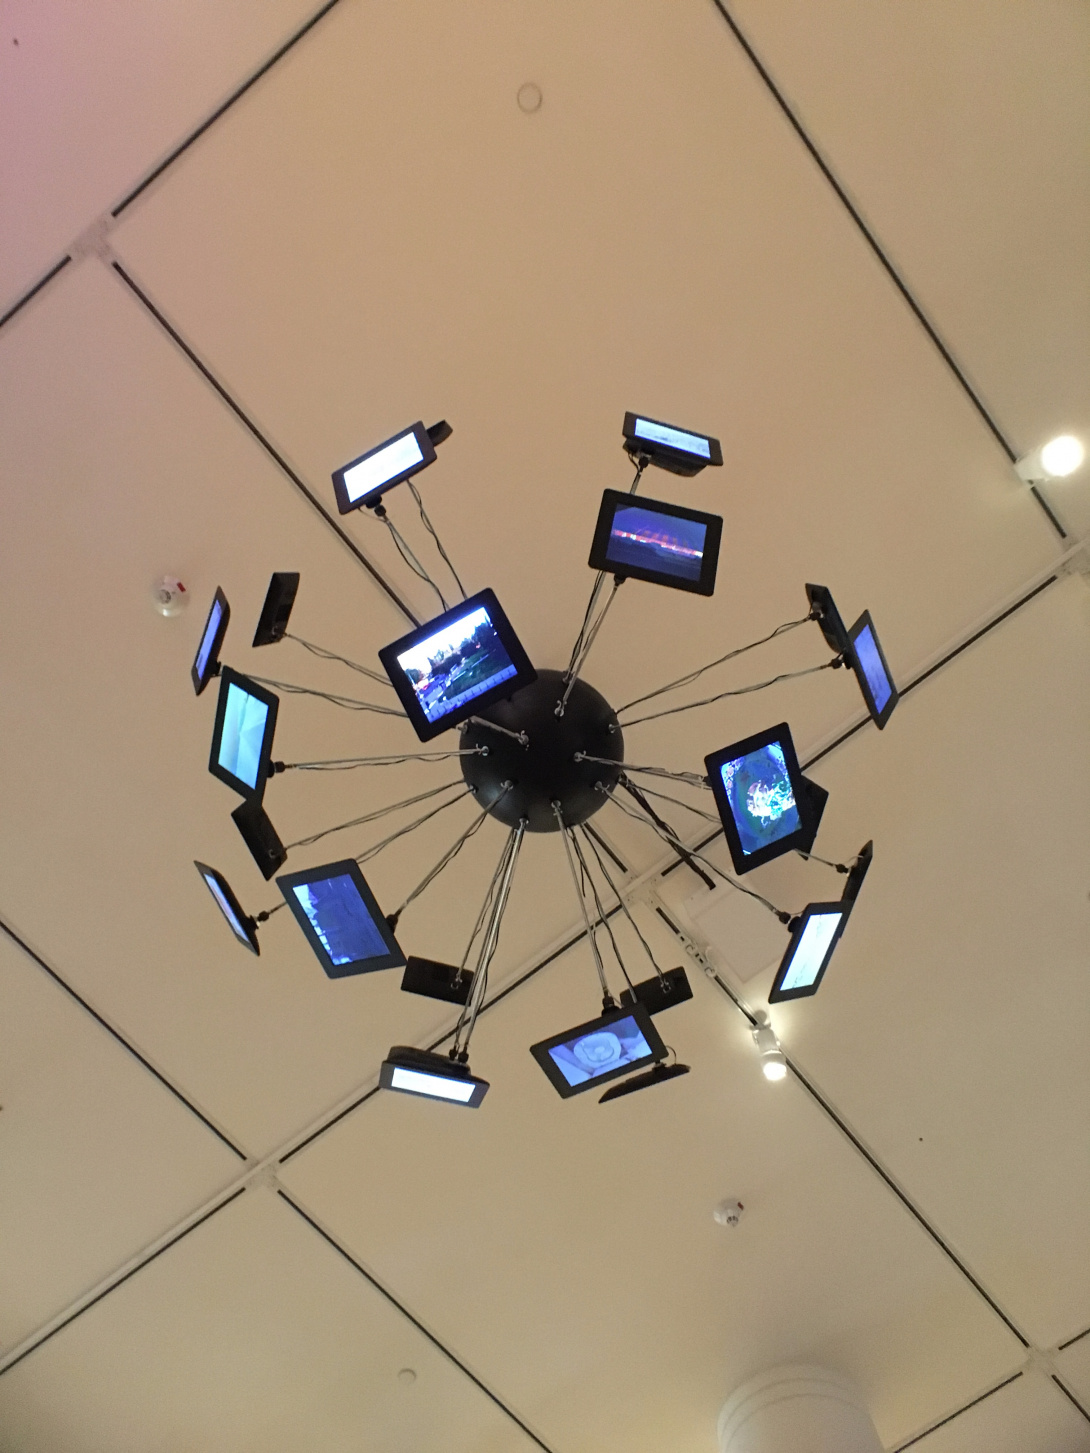 A photograph of a black ball hanging from the ceiling. It has multiple screens sticking out from it. The view is from below, looking up at all the screens.